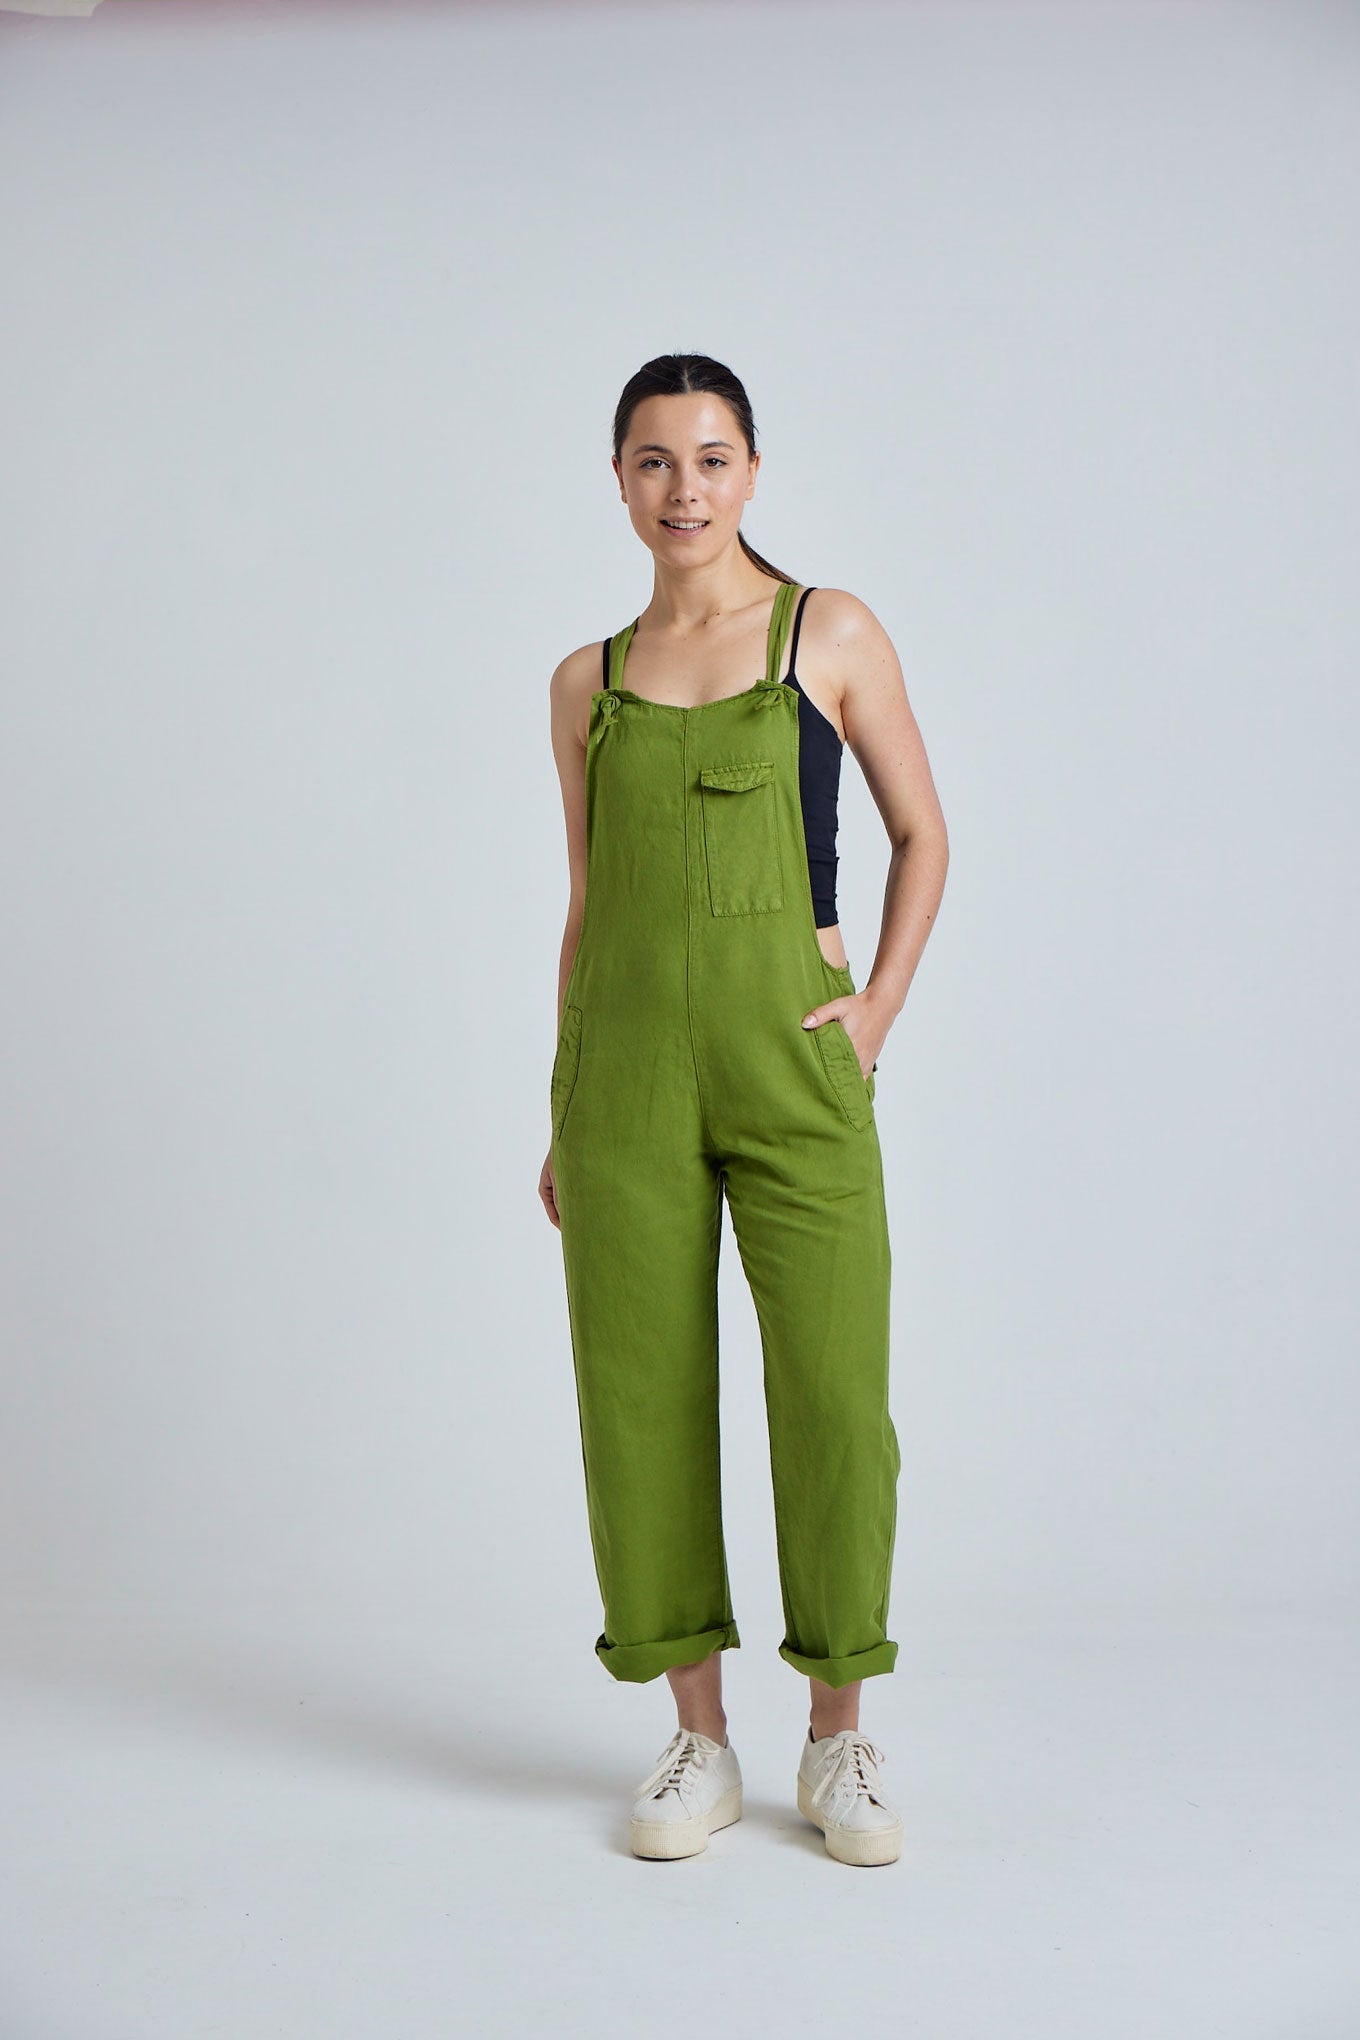 MARY-LOU Green - GOTS Organic Cotton Dungaress by Flax & Loom, SIZE 2 / UK 10 / EUR 38